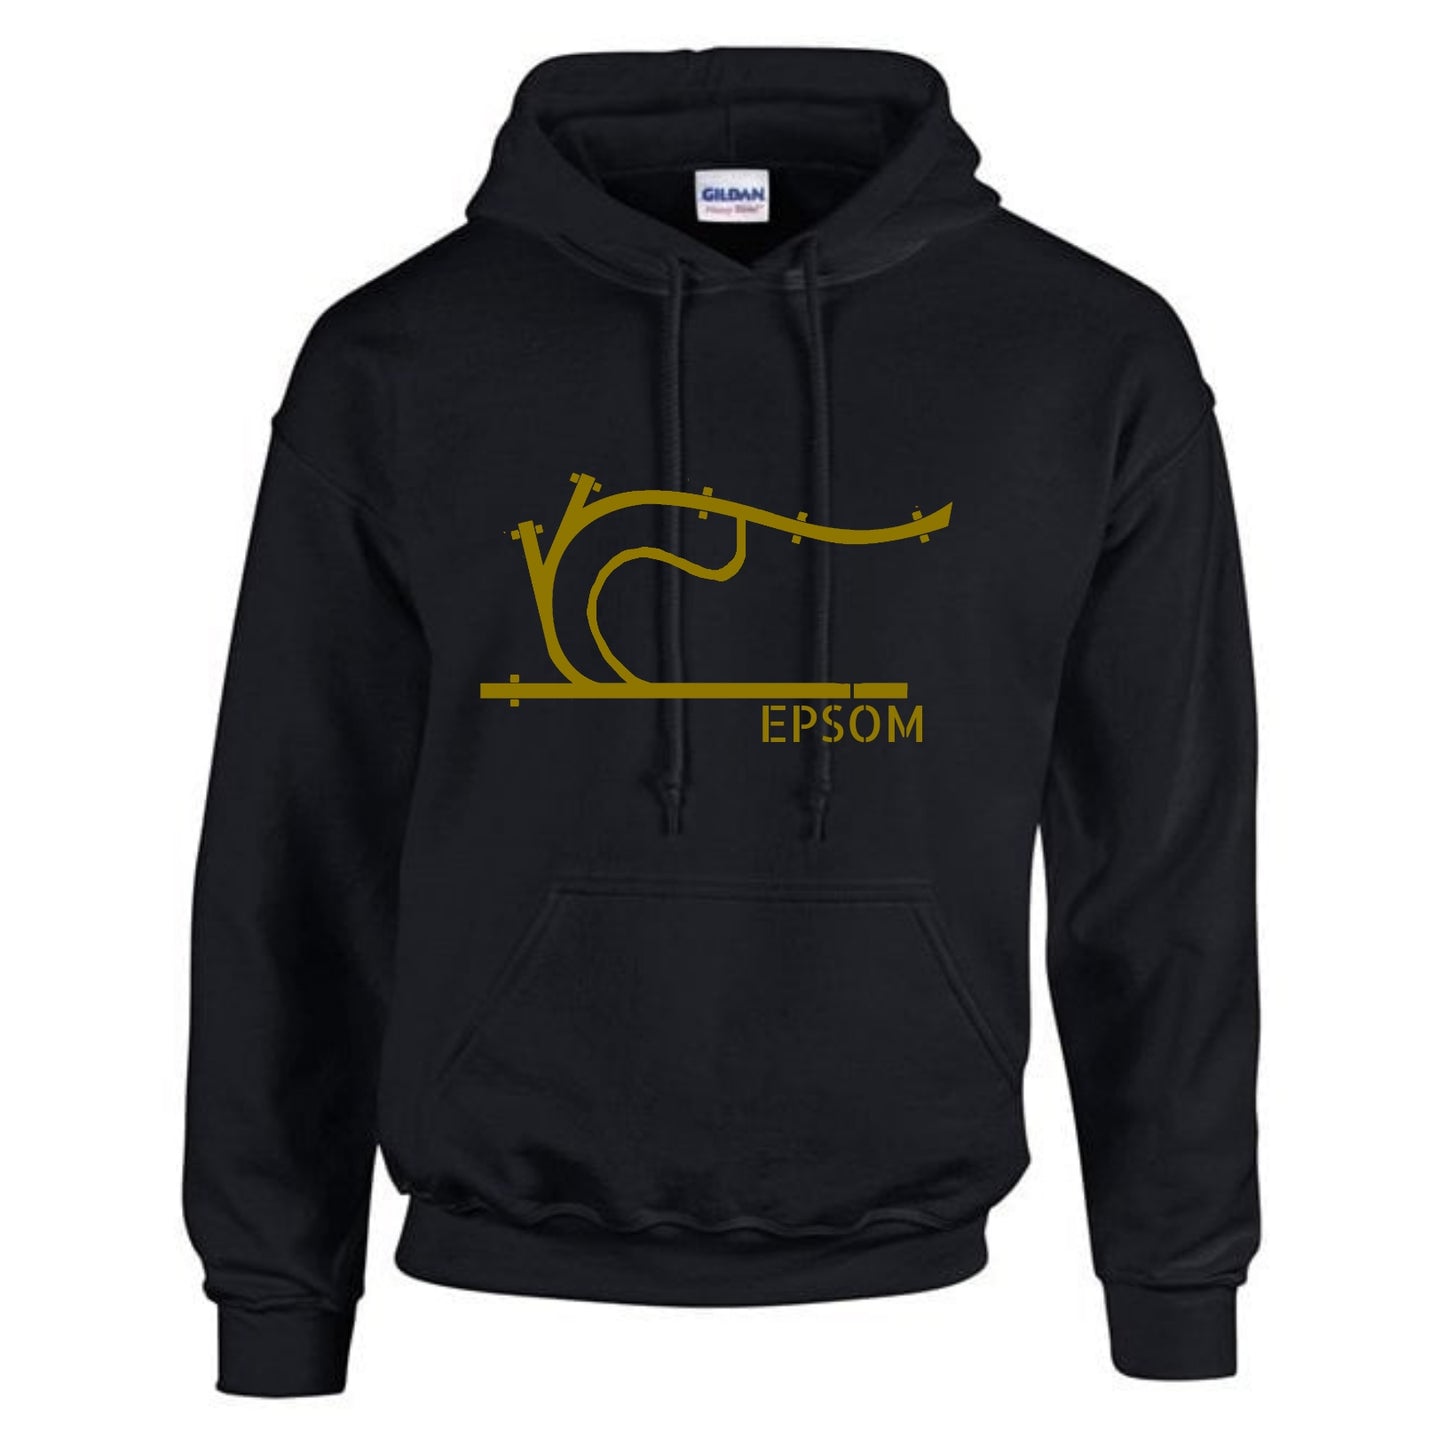 Epsom Course Map Hoodie Featuring The Great Metropolitan Course